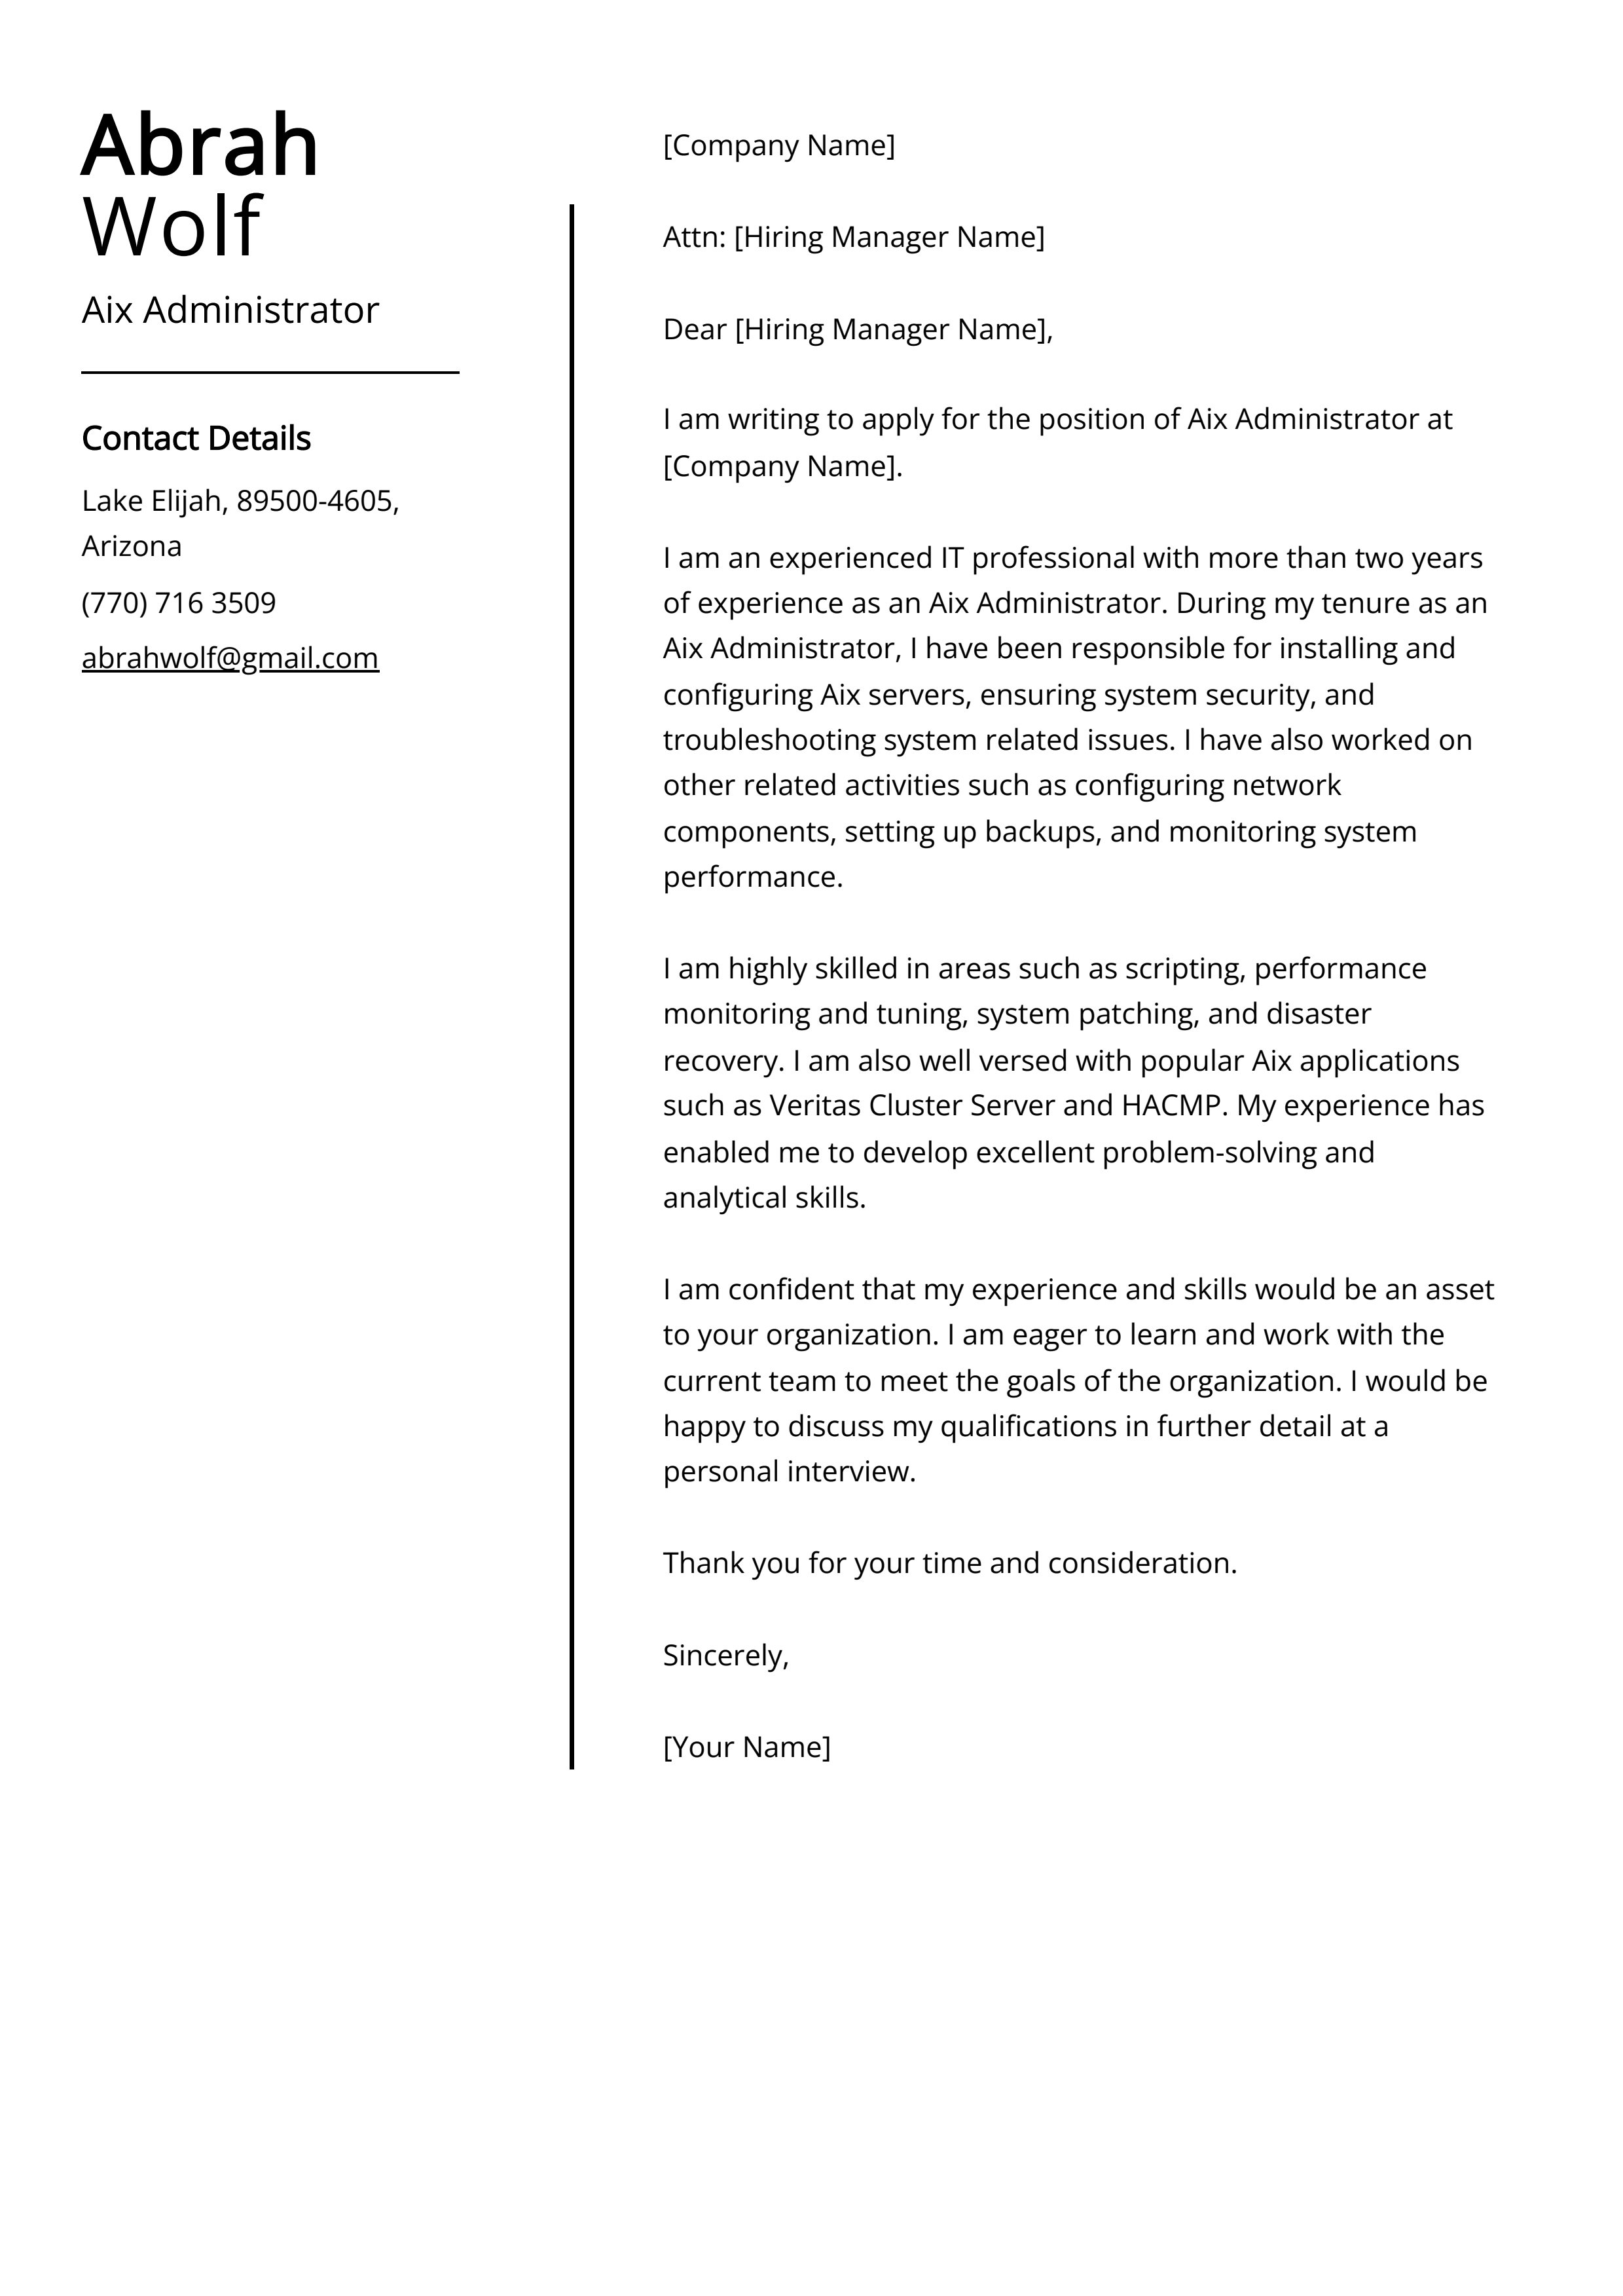 Aix Administrator Cover Letter Example